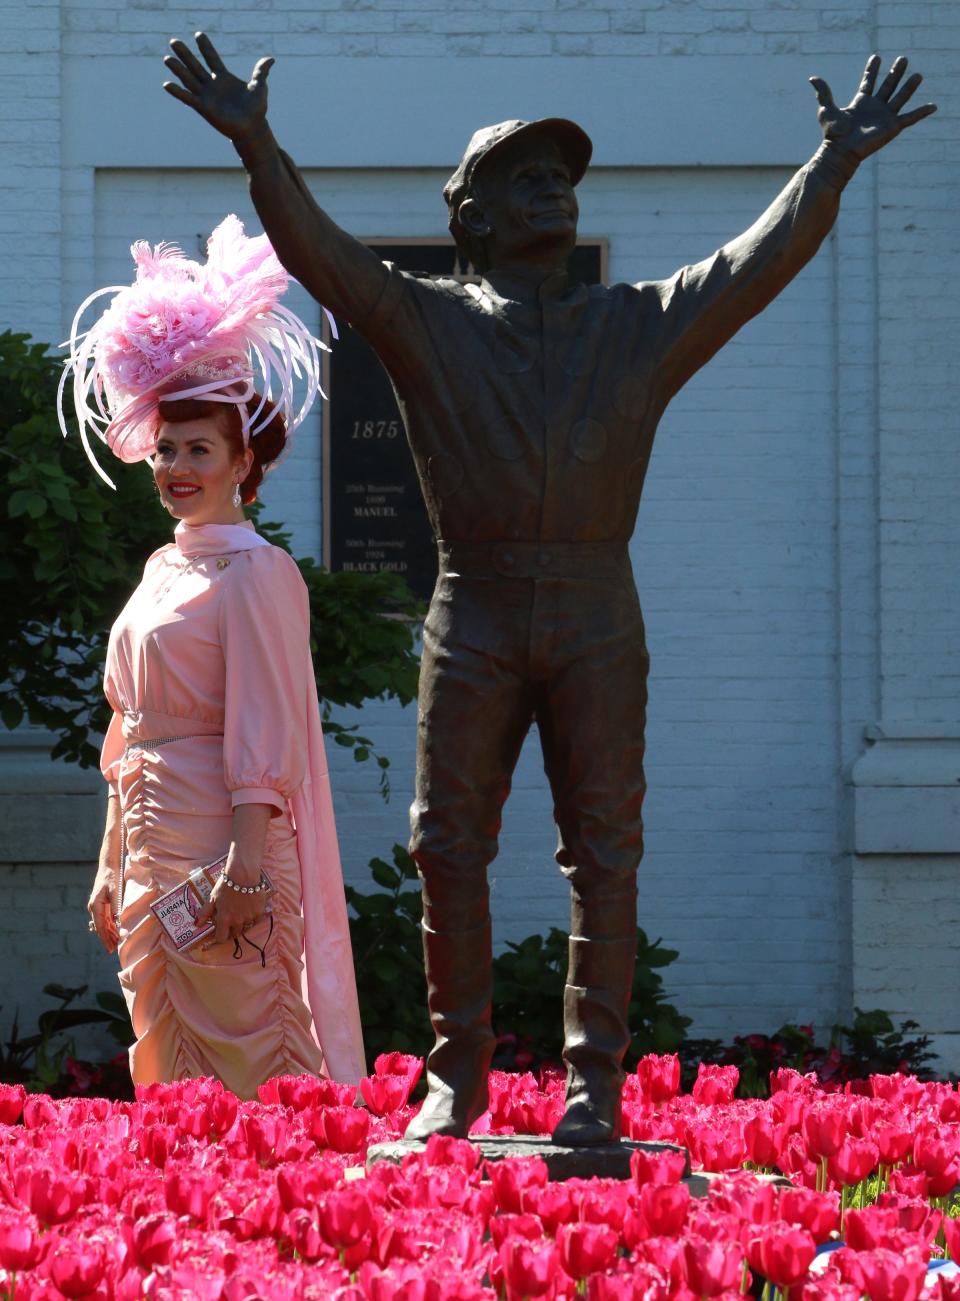 Carrie Ketterman of Corydon Ind, walks by the Pat Day statue in the Paddock garden, wearing a dress inspired by Lucille Ball in the movie “Ziegfelds Follies.”